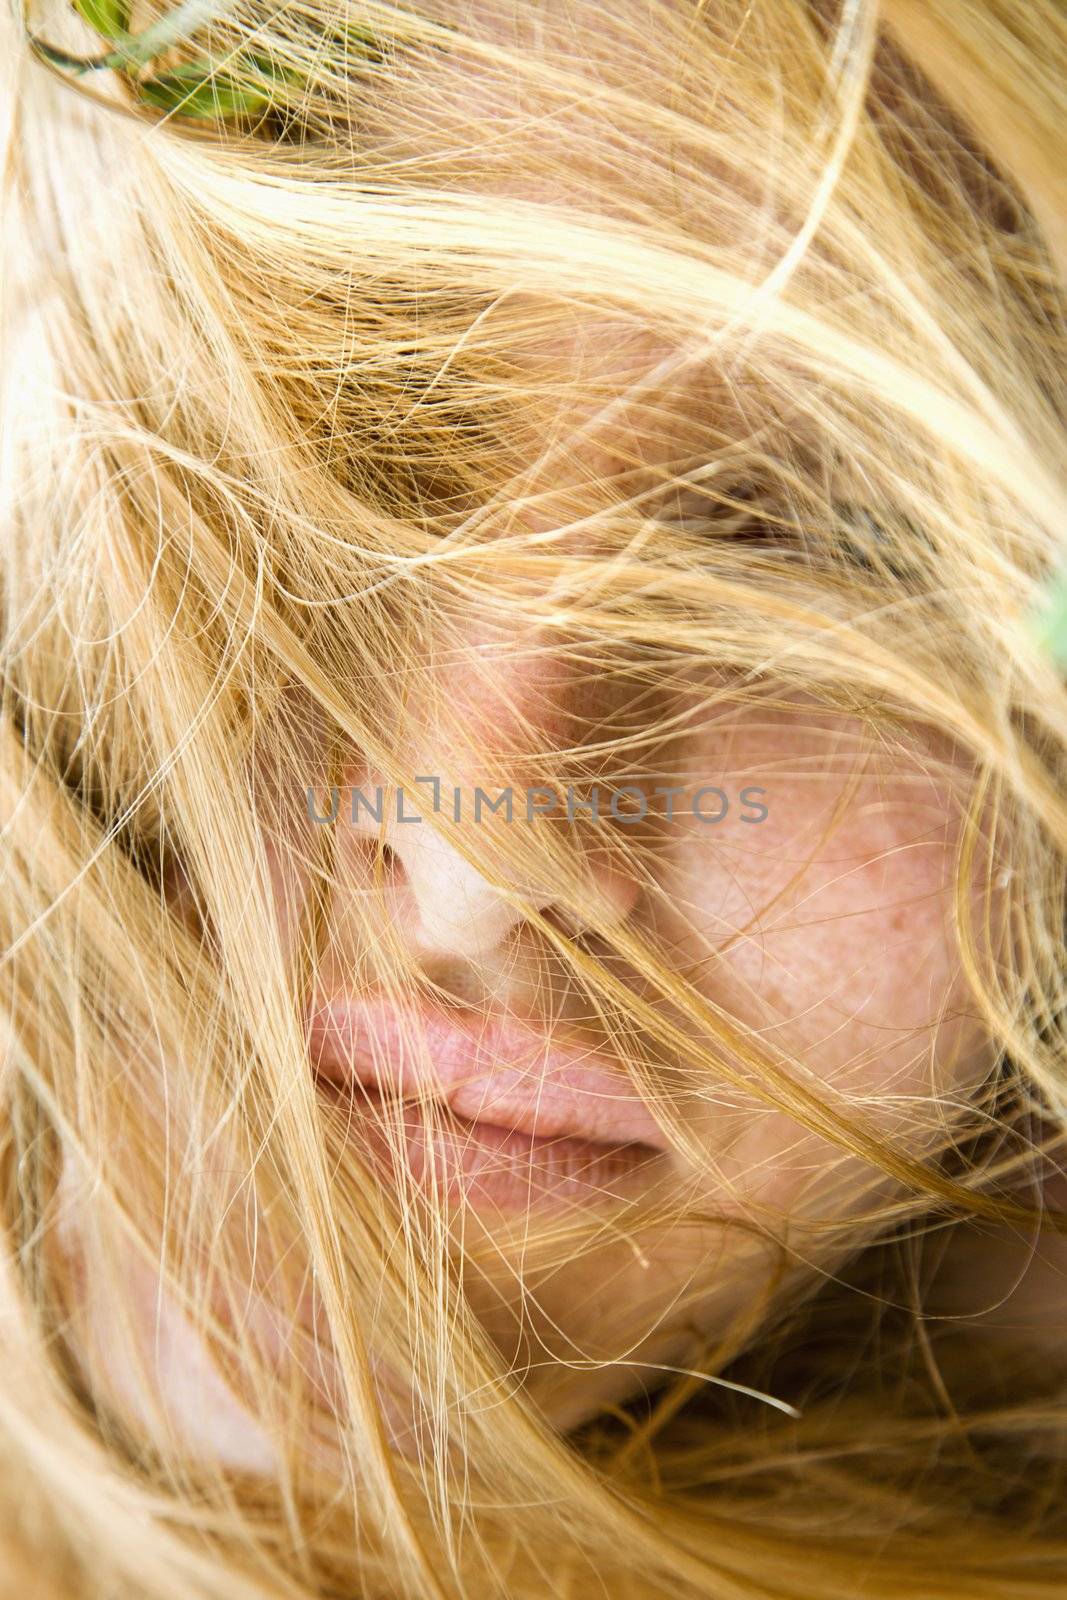 Close up portrait of redheaded woman with windblown hair covering face.